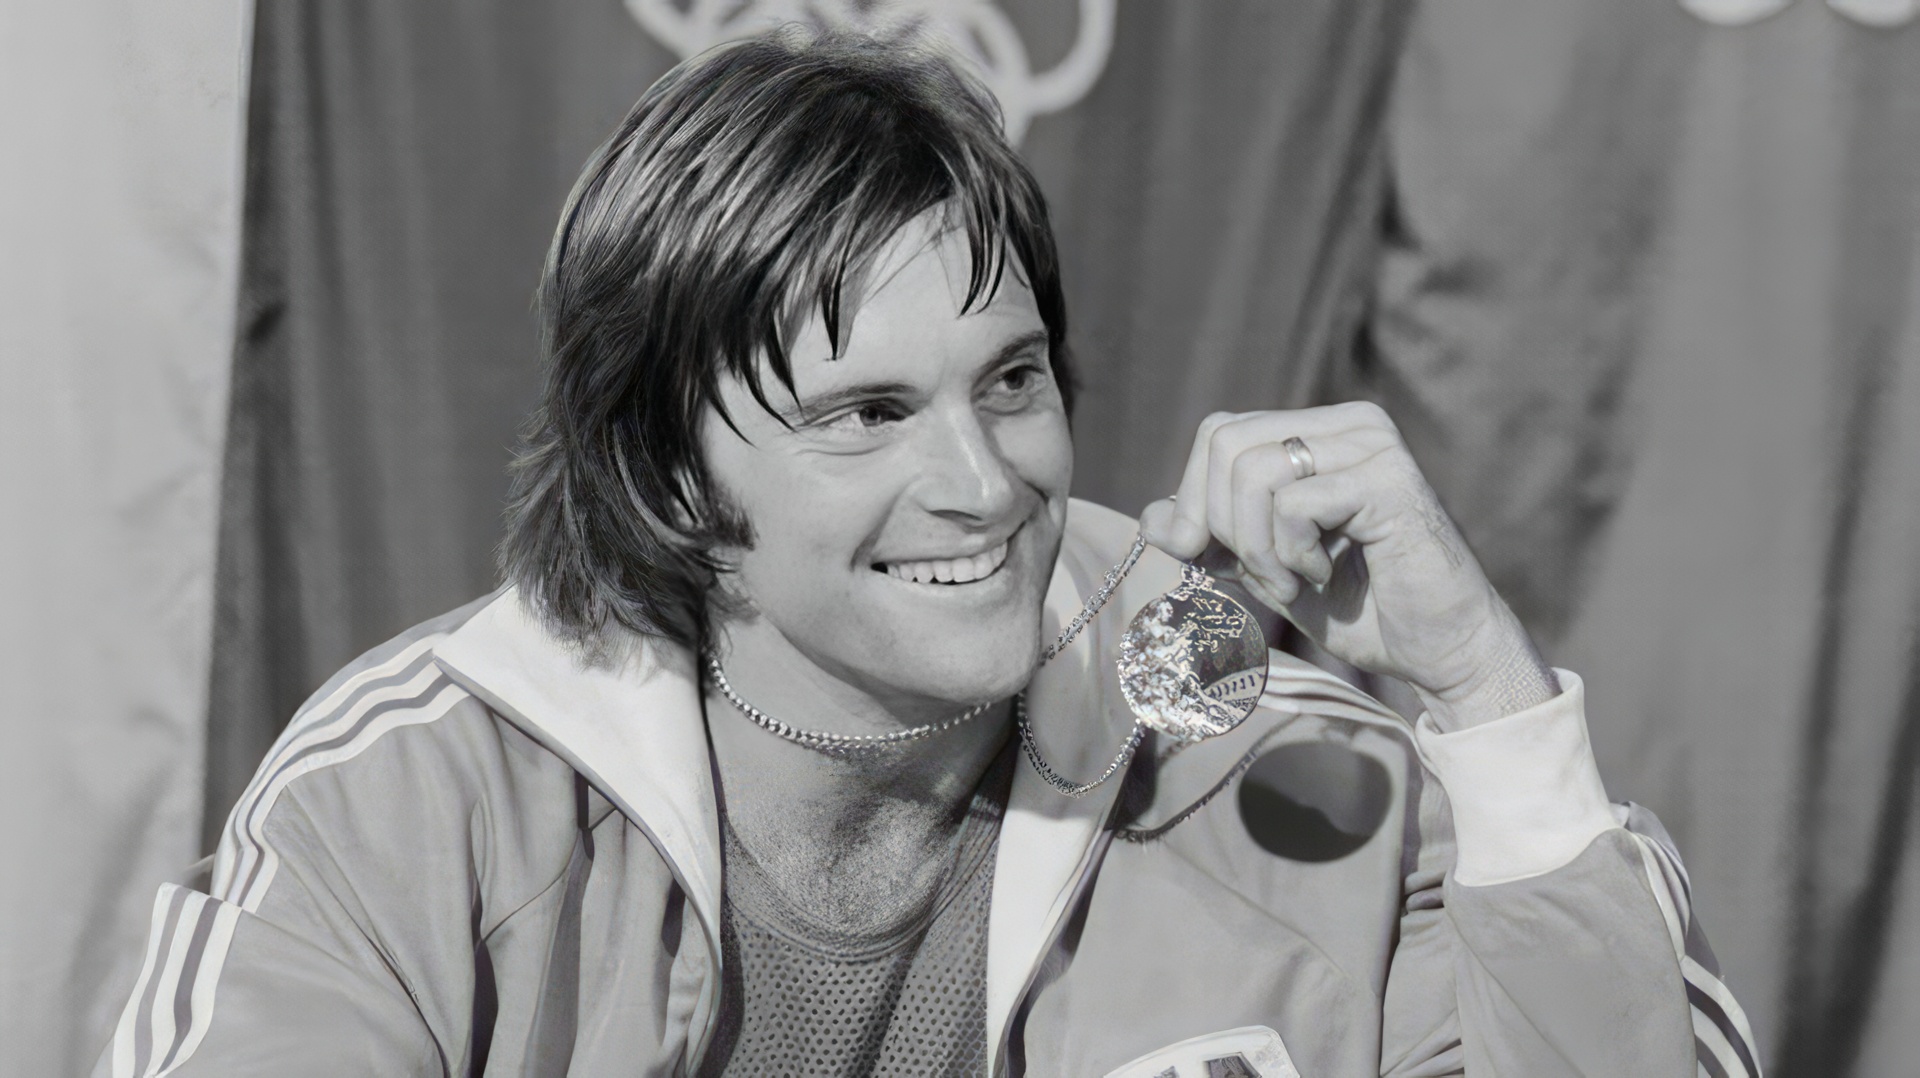 In 1976, Bruce Jenner became an Olympic champion